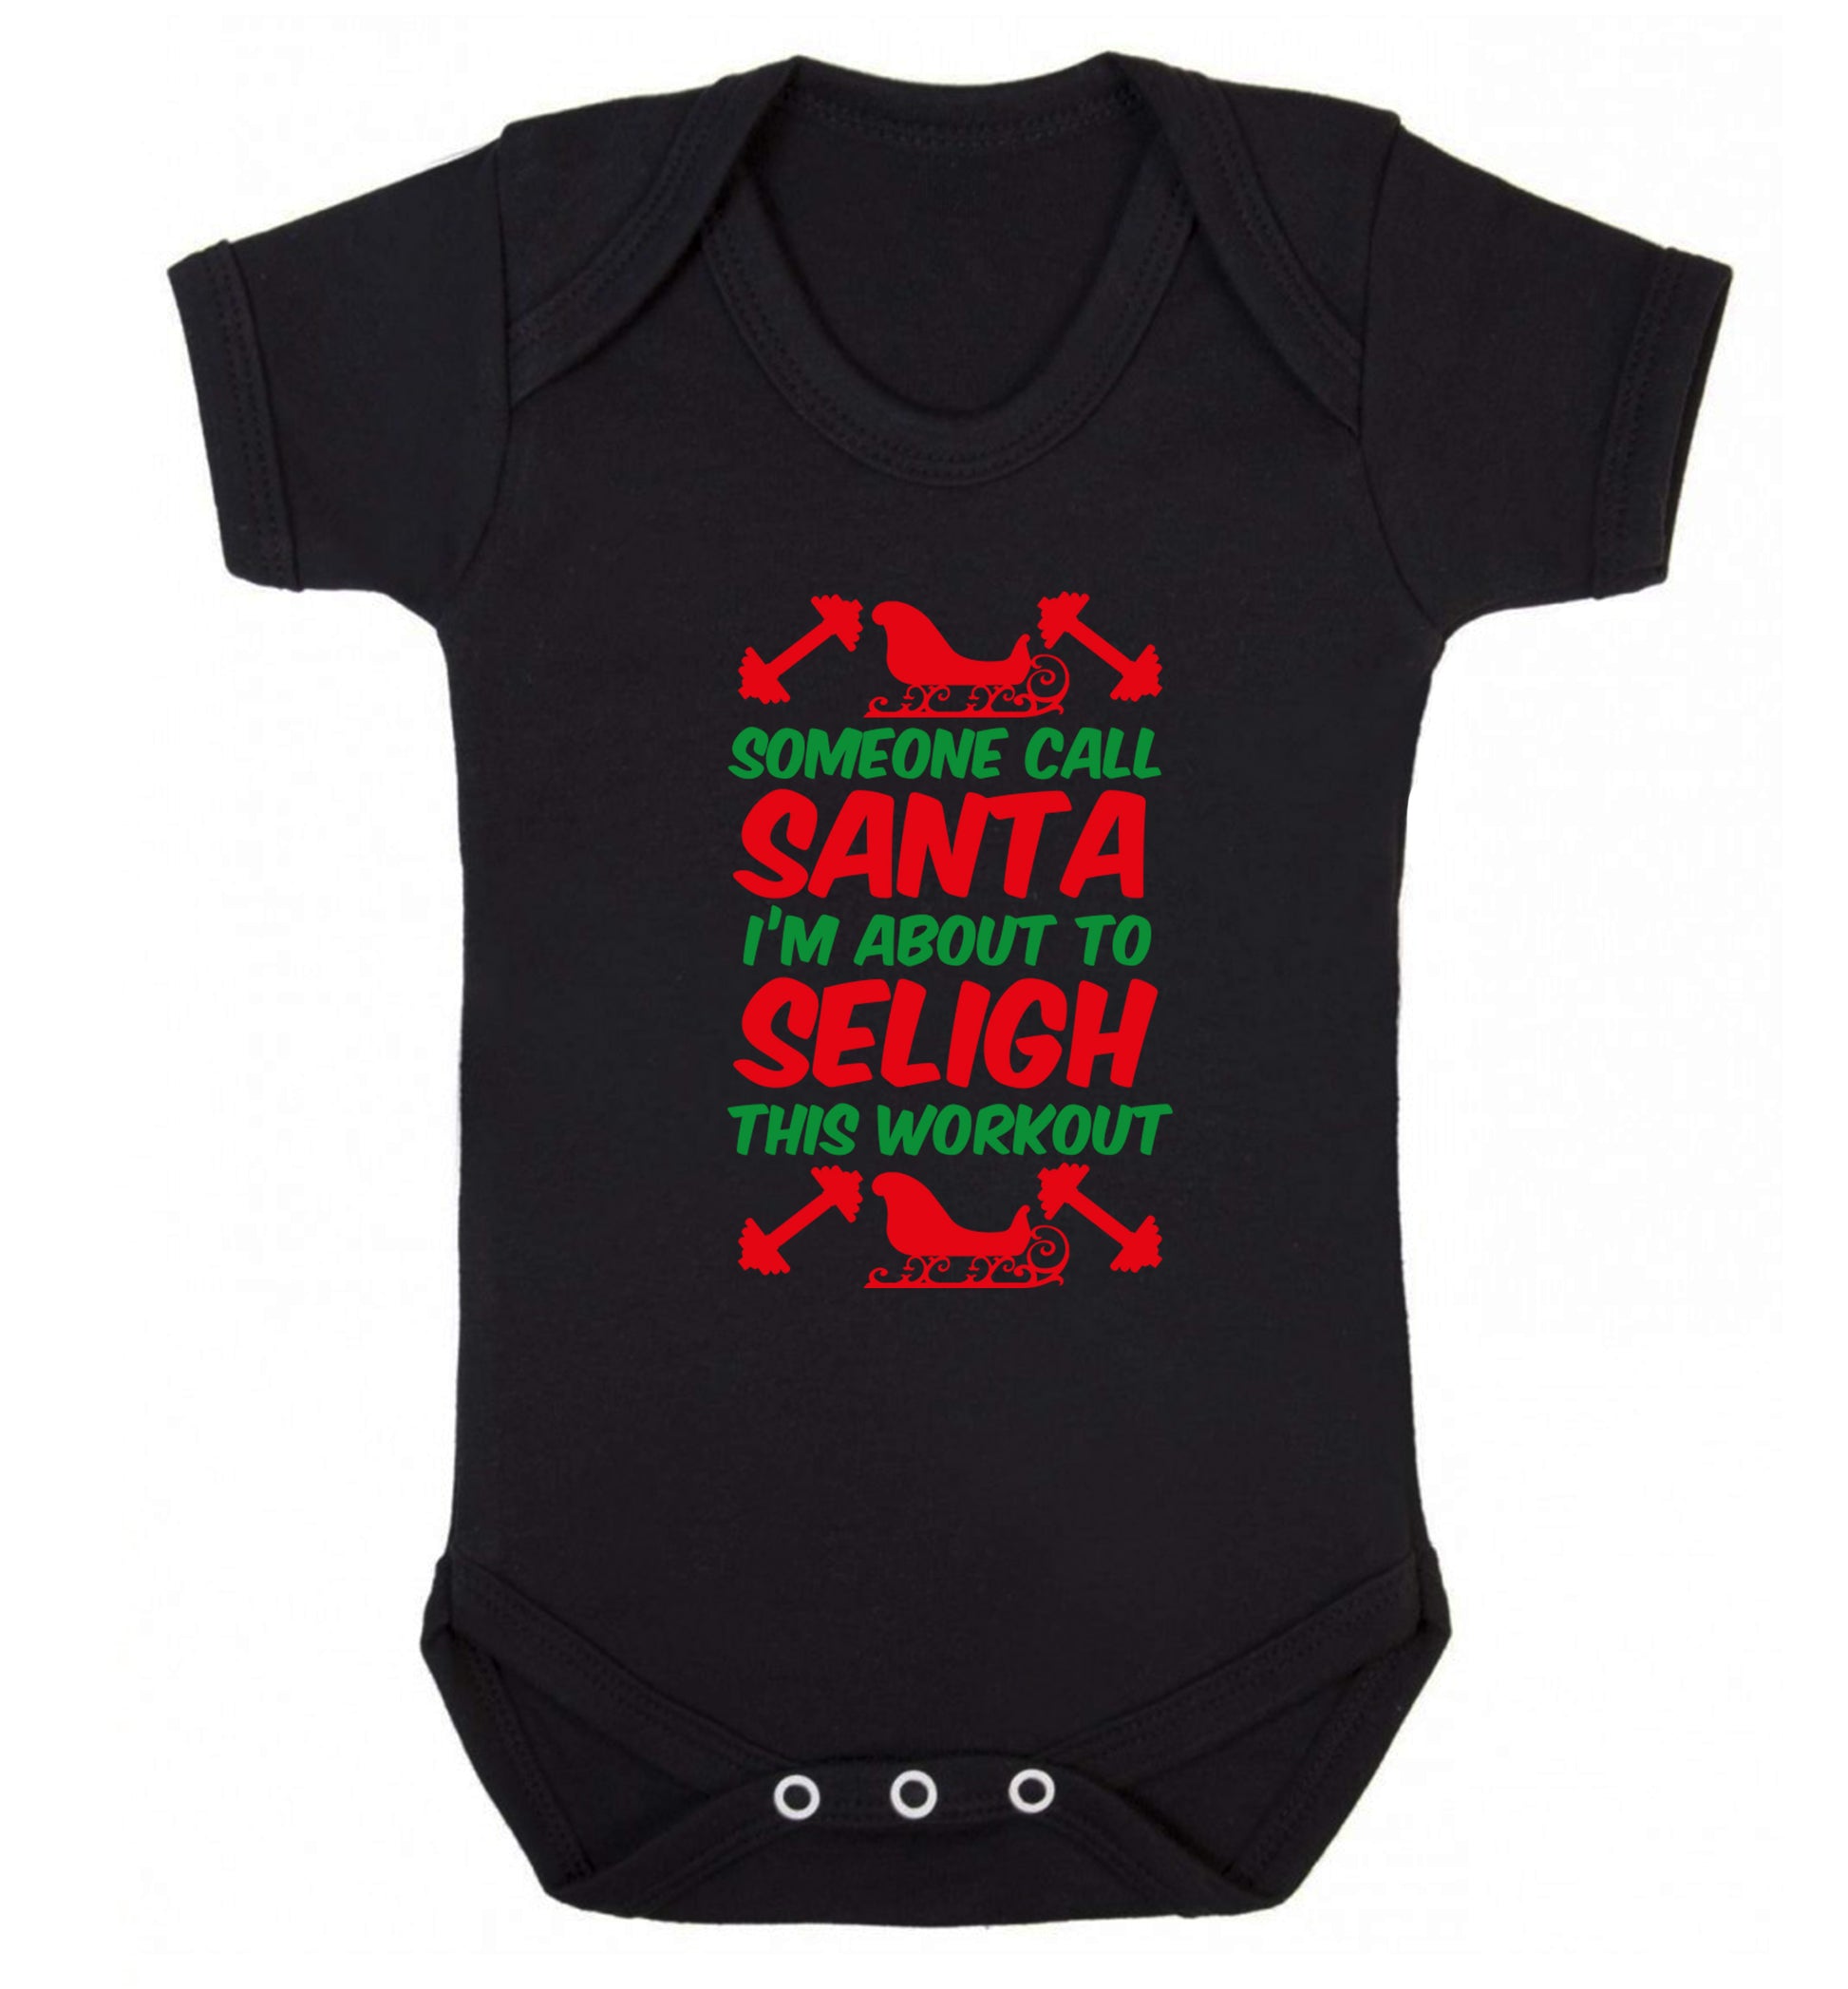 Someone call santa, I'm about to sleigh this workout Baby Vest black 18-24 months